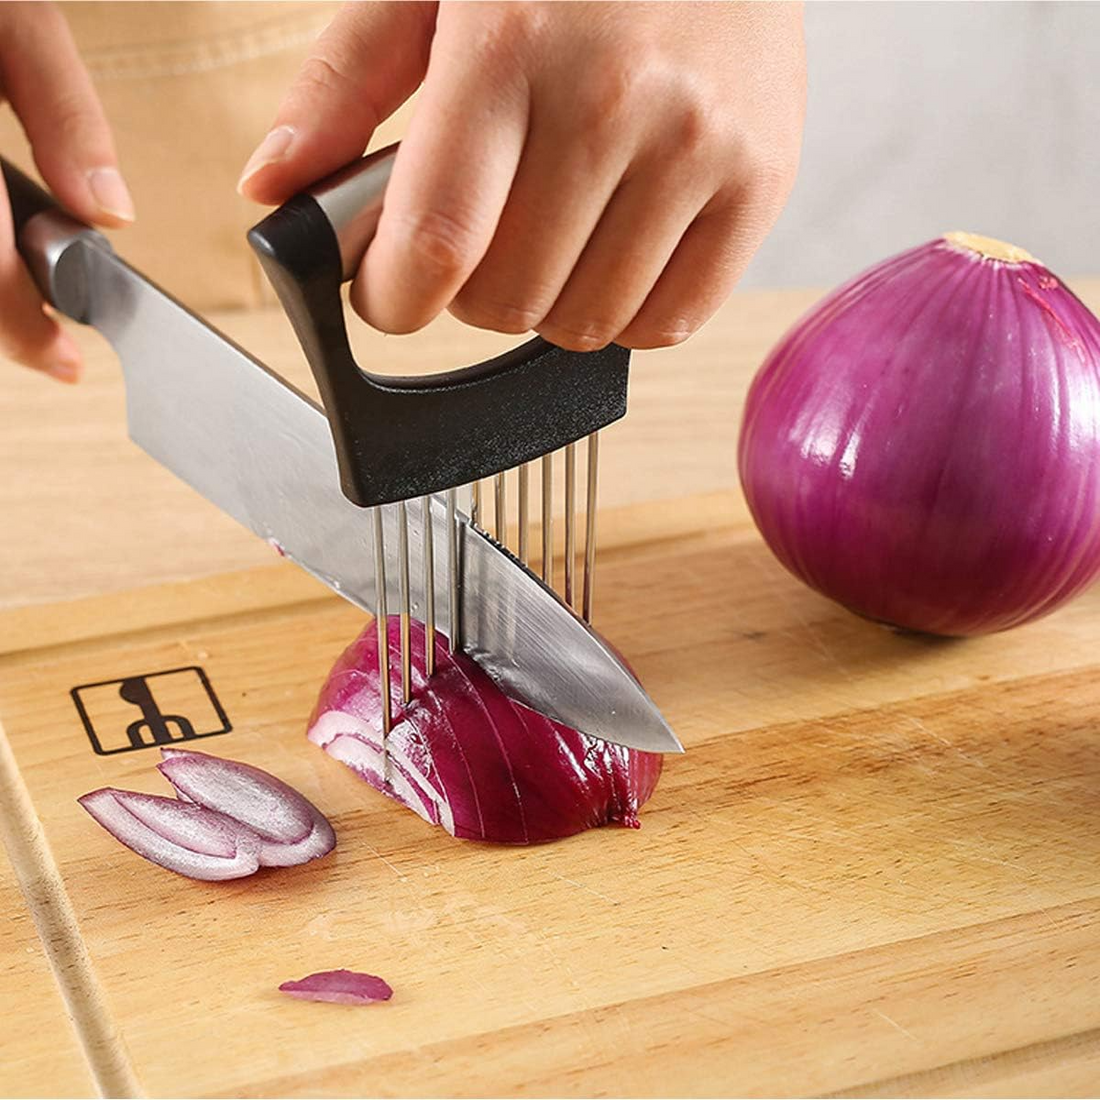 Stainless Steel Food Slicer Assistant - Kitchen Cutting Gadgets (2pcs) - Luxe1